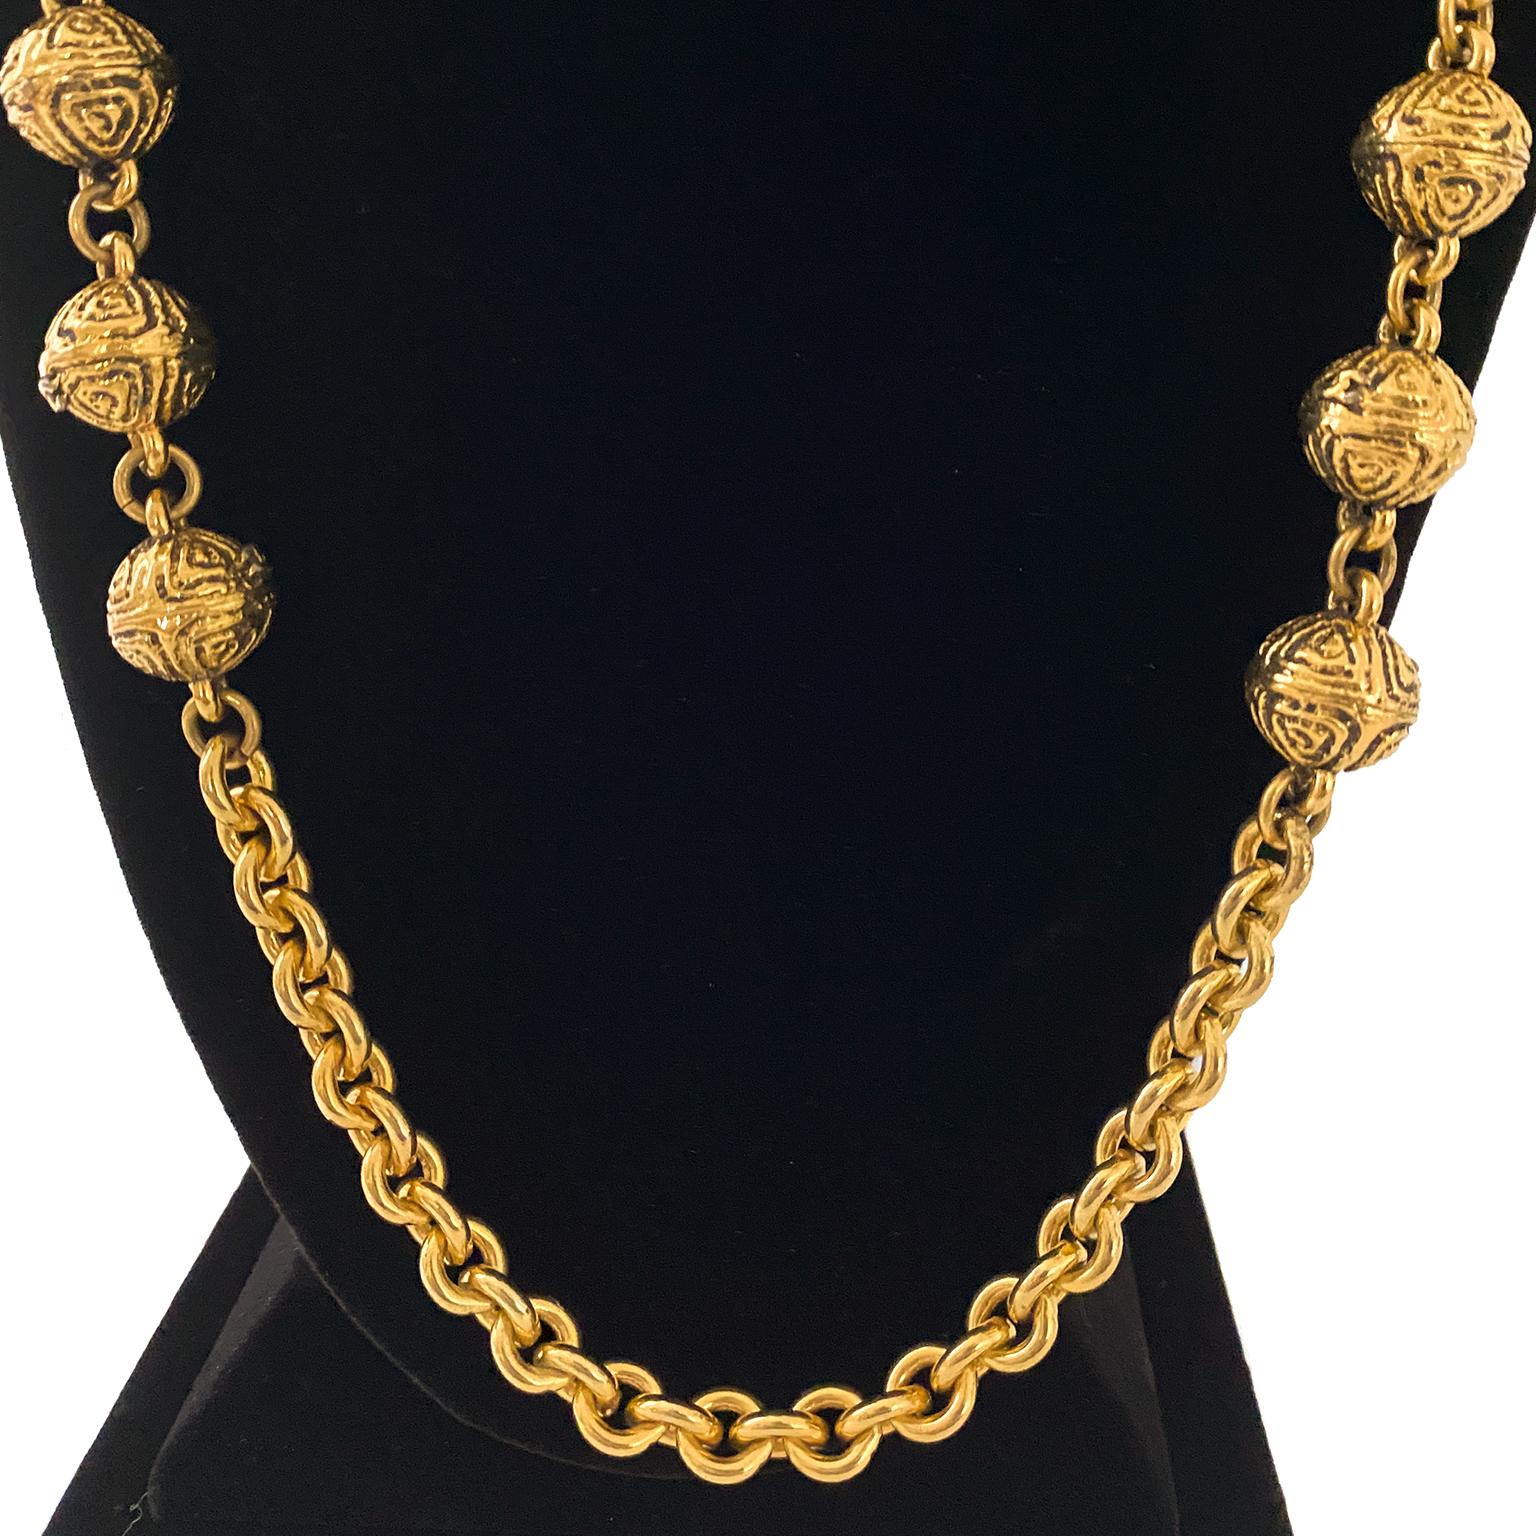 Chanel gold tone thick chain link necklace from 1985. Six intricately detailed gilded beads on either side. Hook and eye clasp. Hanging oval stamped Chanel brand tag. Can be worn long or wrapped to make it a multi-layer chain. Excellent vintage